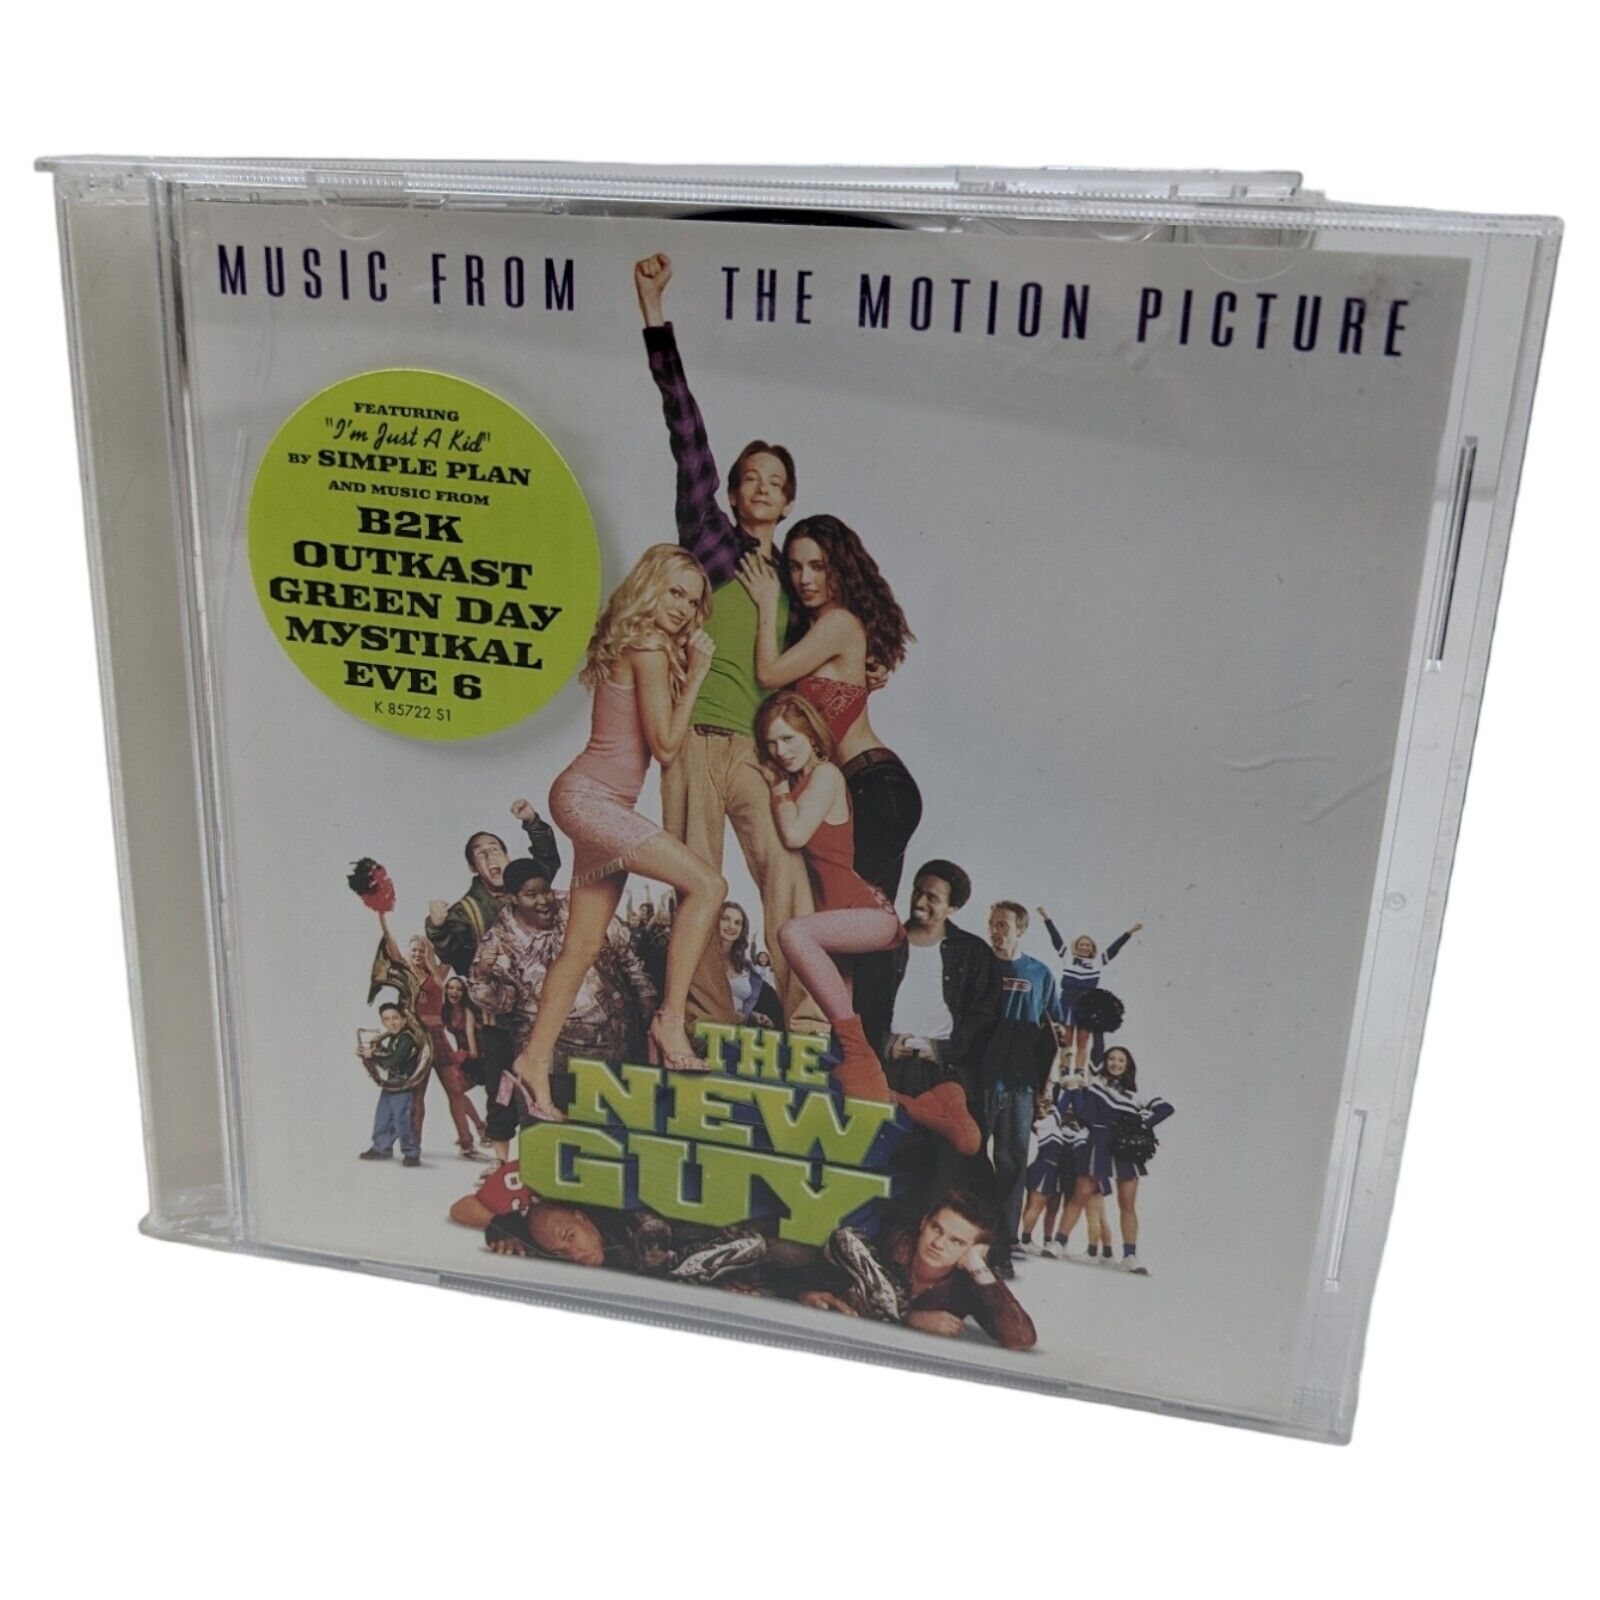 The New Guy Music From The Motion Picture (CD, 2002) Outkast, Green Day, Eve 6